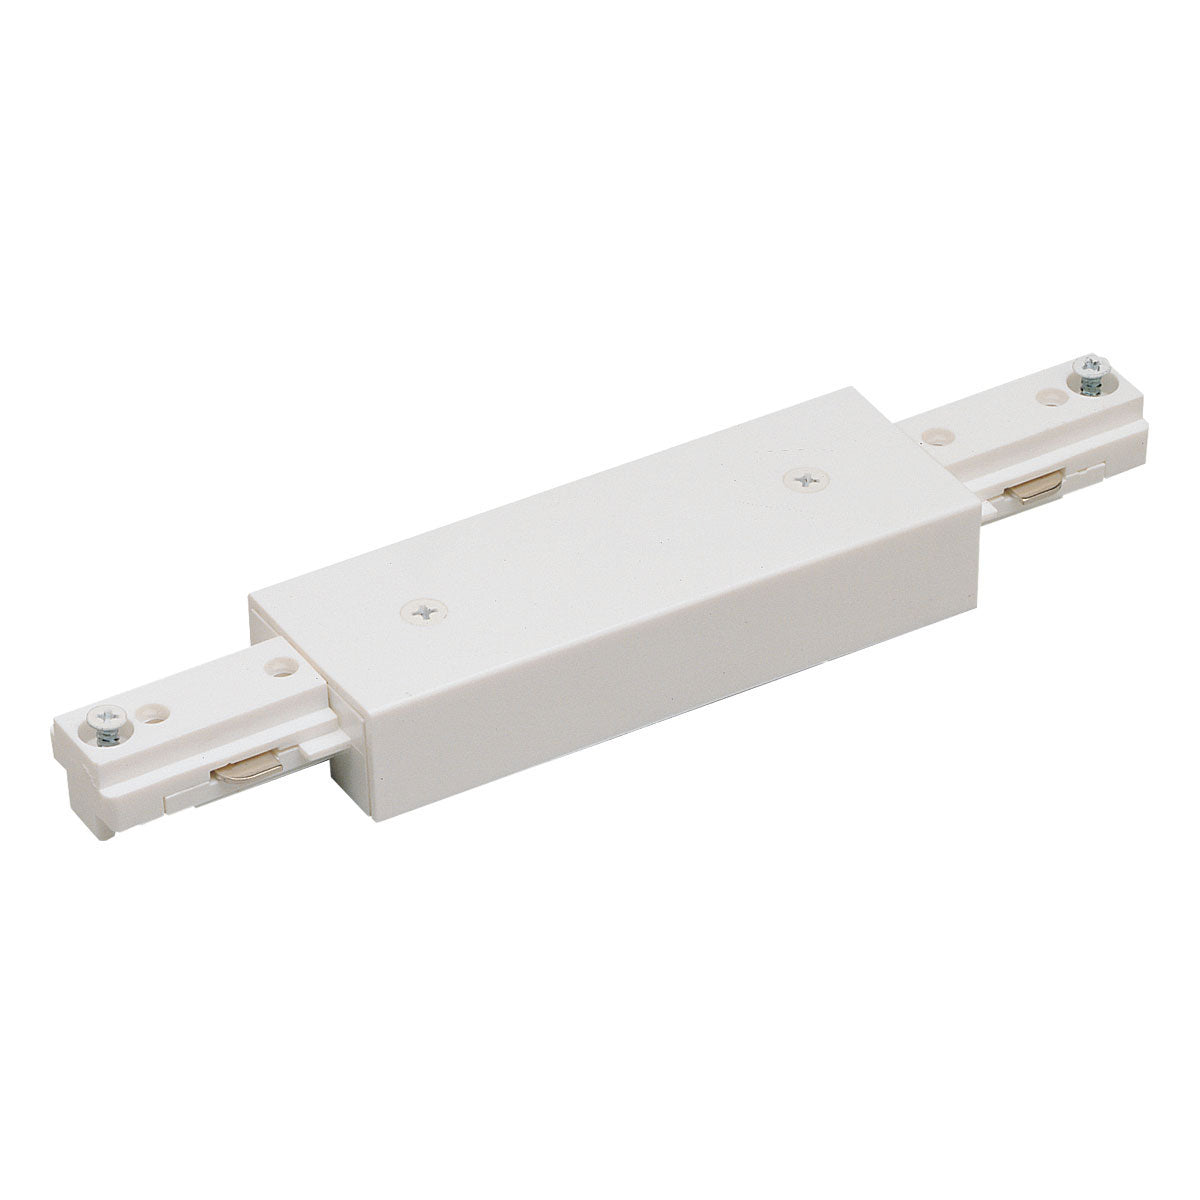 Nora Lighting NT-2312W - Track - I Connector, 2 Circuit Track, White